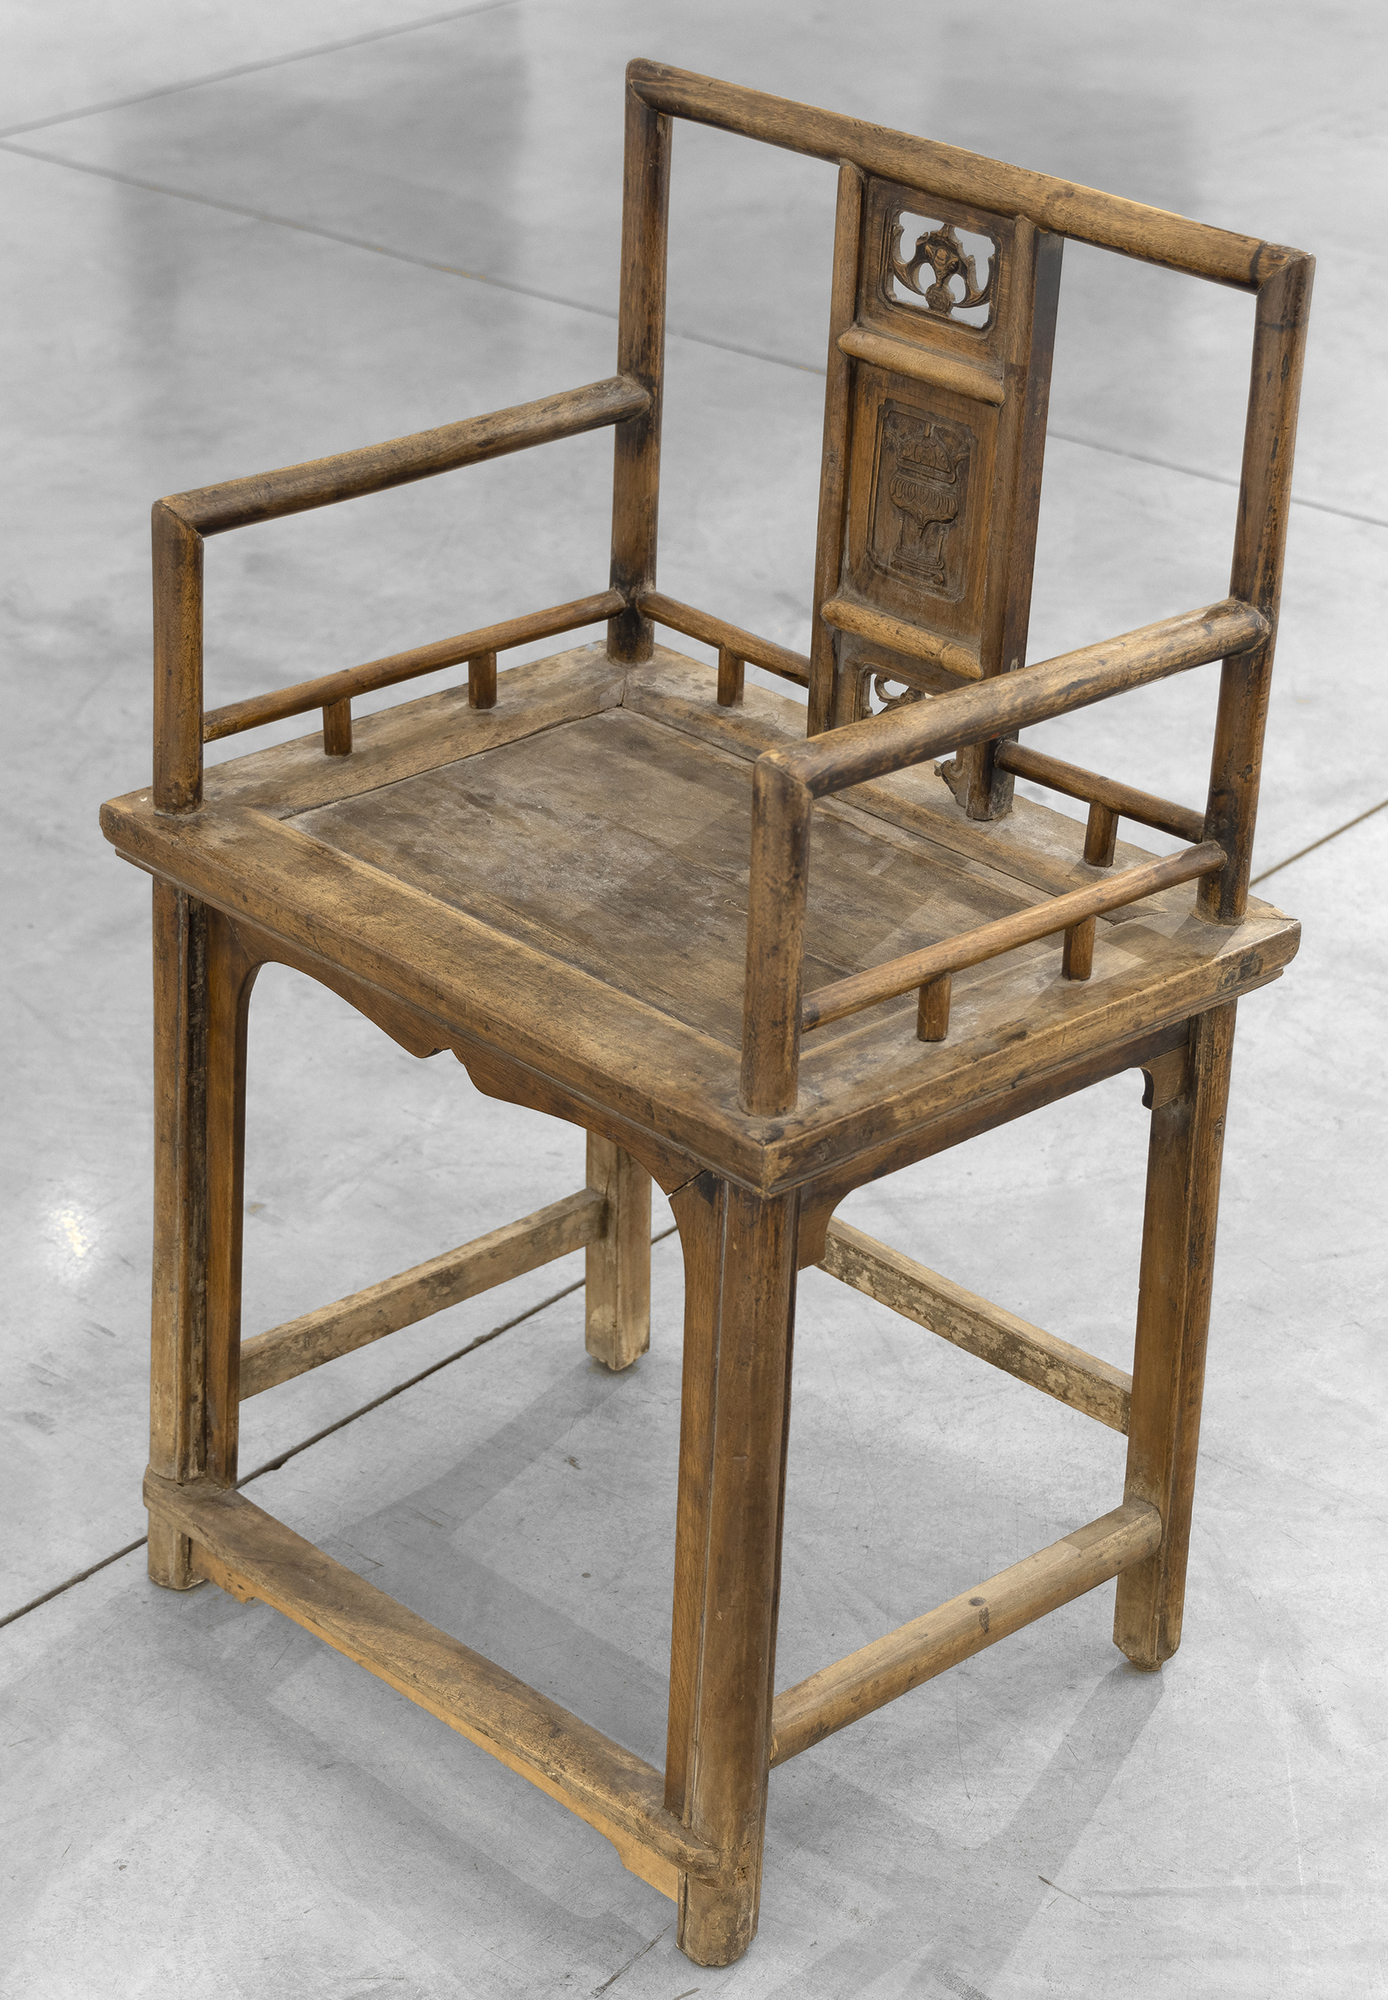 AI WEIWEI - "Fairytale" Chairs - wood - 49 x 45 x 17 1/2 in.